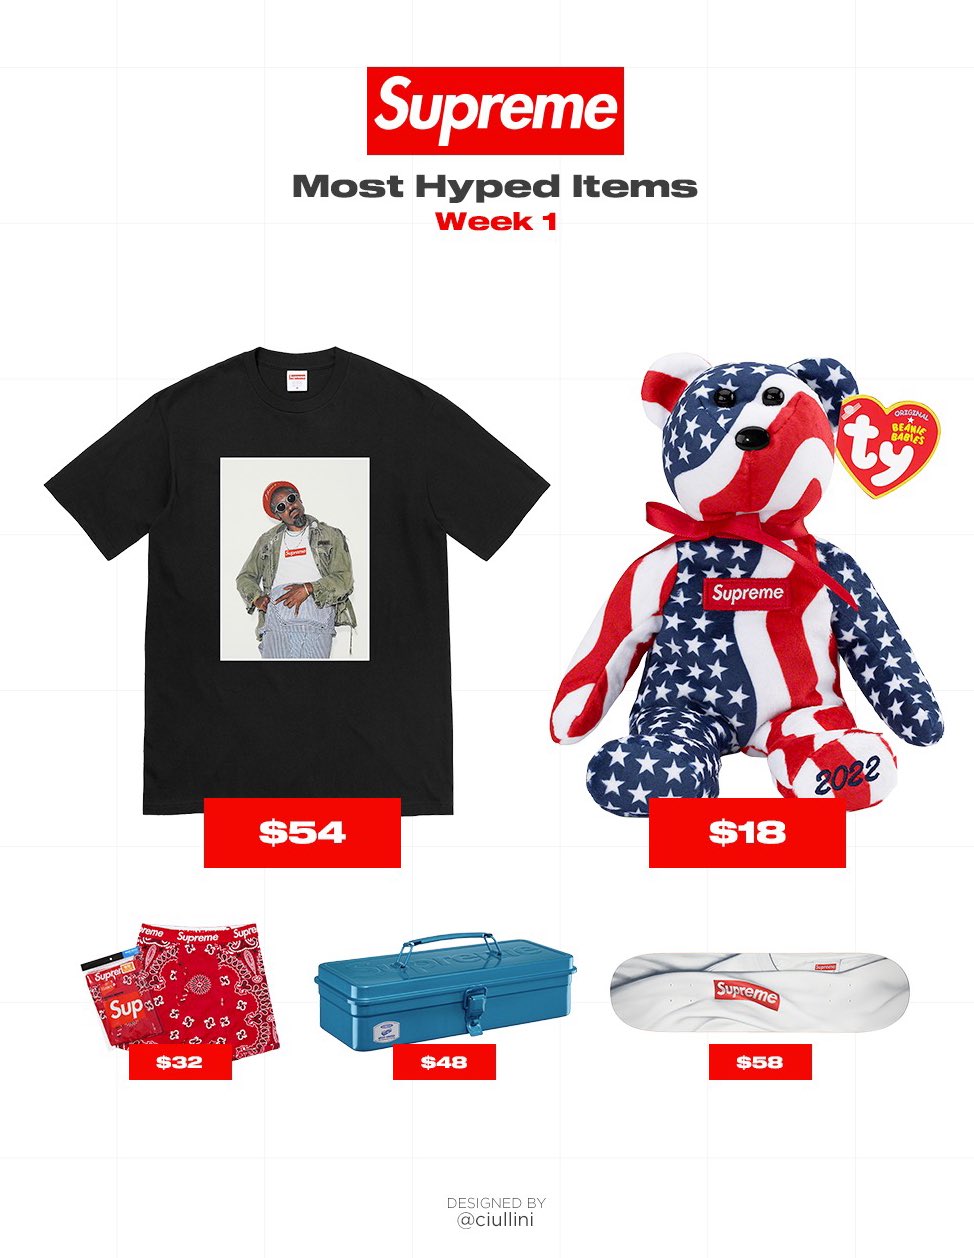 DropsByJay on X: Supreme Week 11 Guide Here are the retail prices and  droplist for this weeks Supreme release. Dropping Thursday, November 10th  at 11am Est/17:00 CEST/16:00 GMT. Chicago store images and